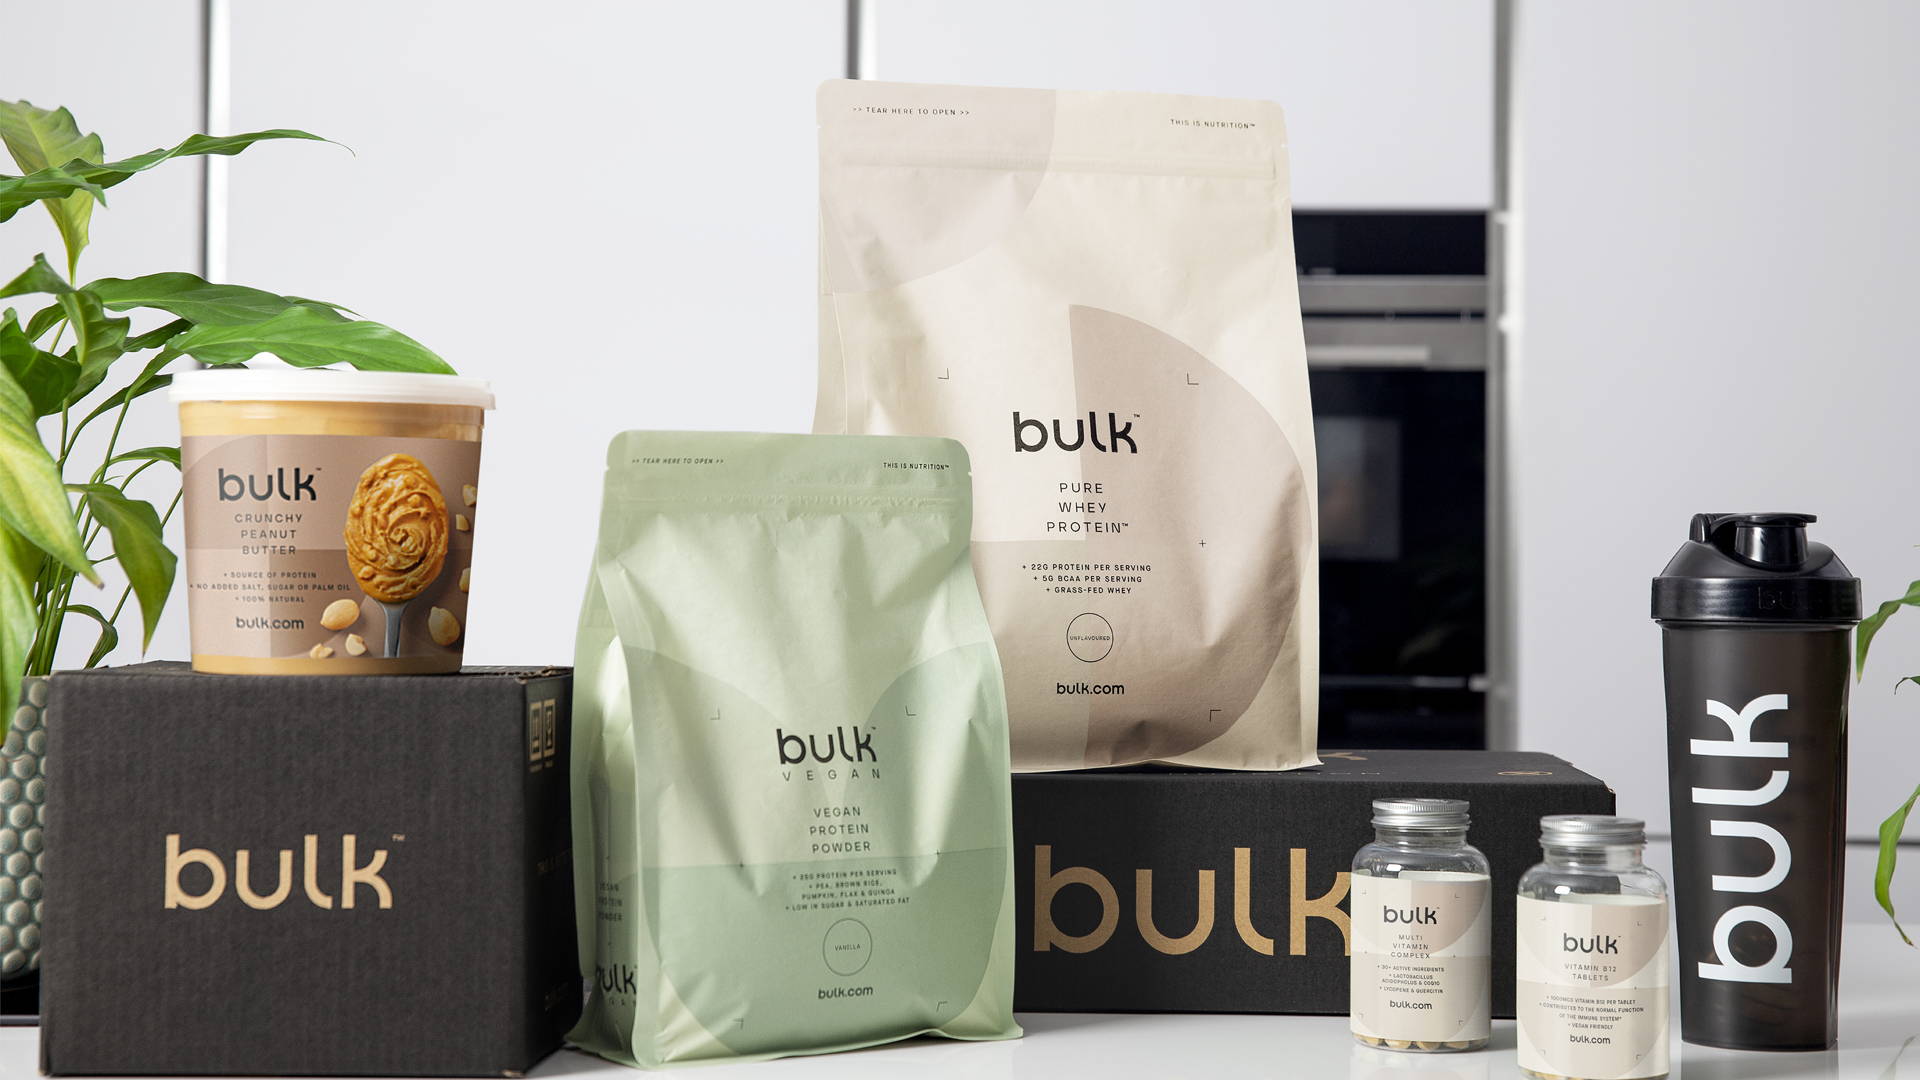 Featured image for bulk Makes The Switch From Protein Powder To Active Nutrition Brand